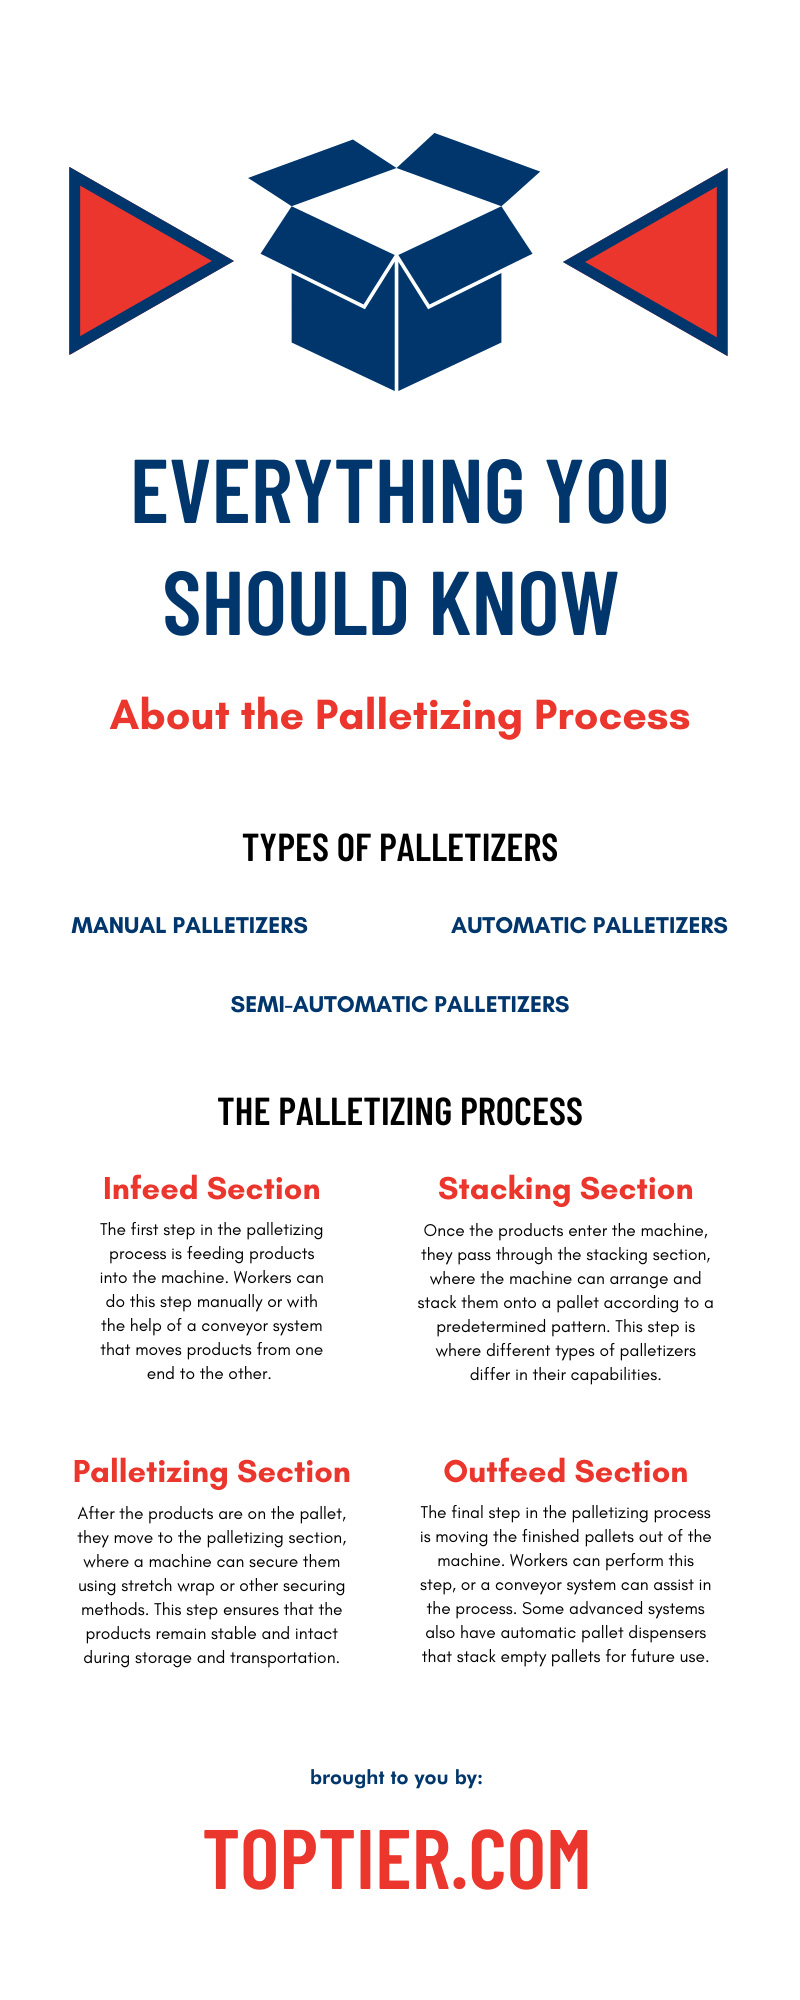 Everything You Should Know About the Palletizing Process